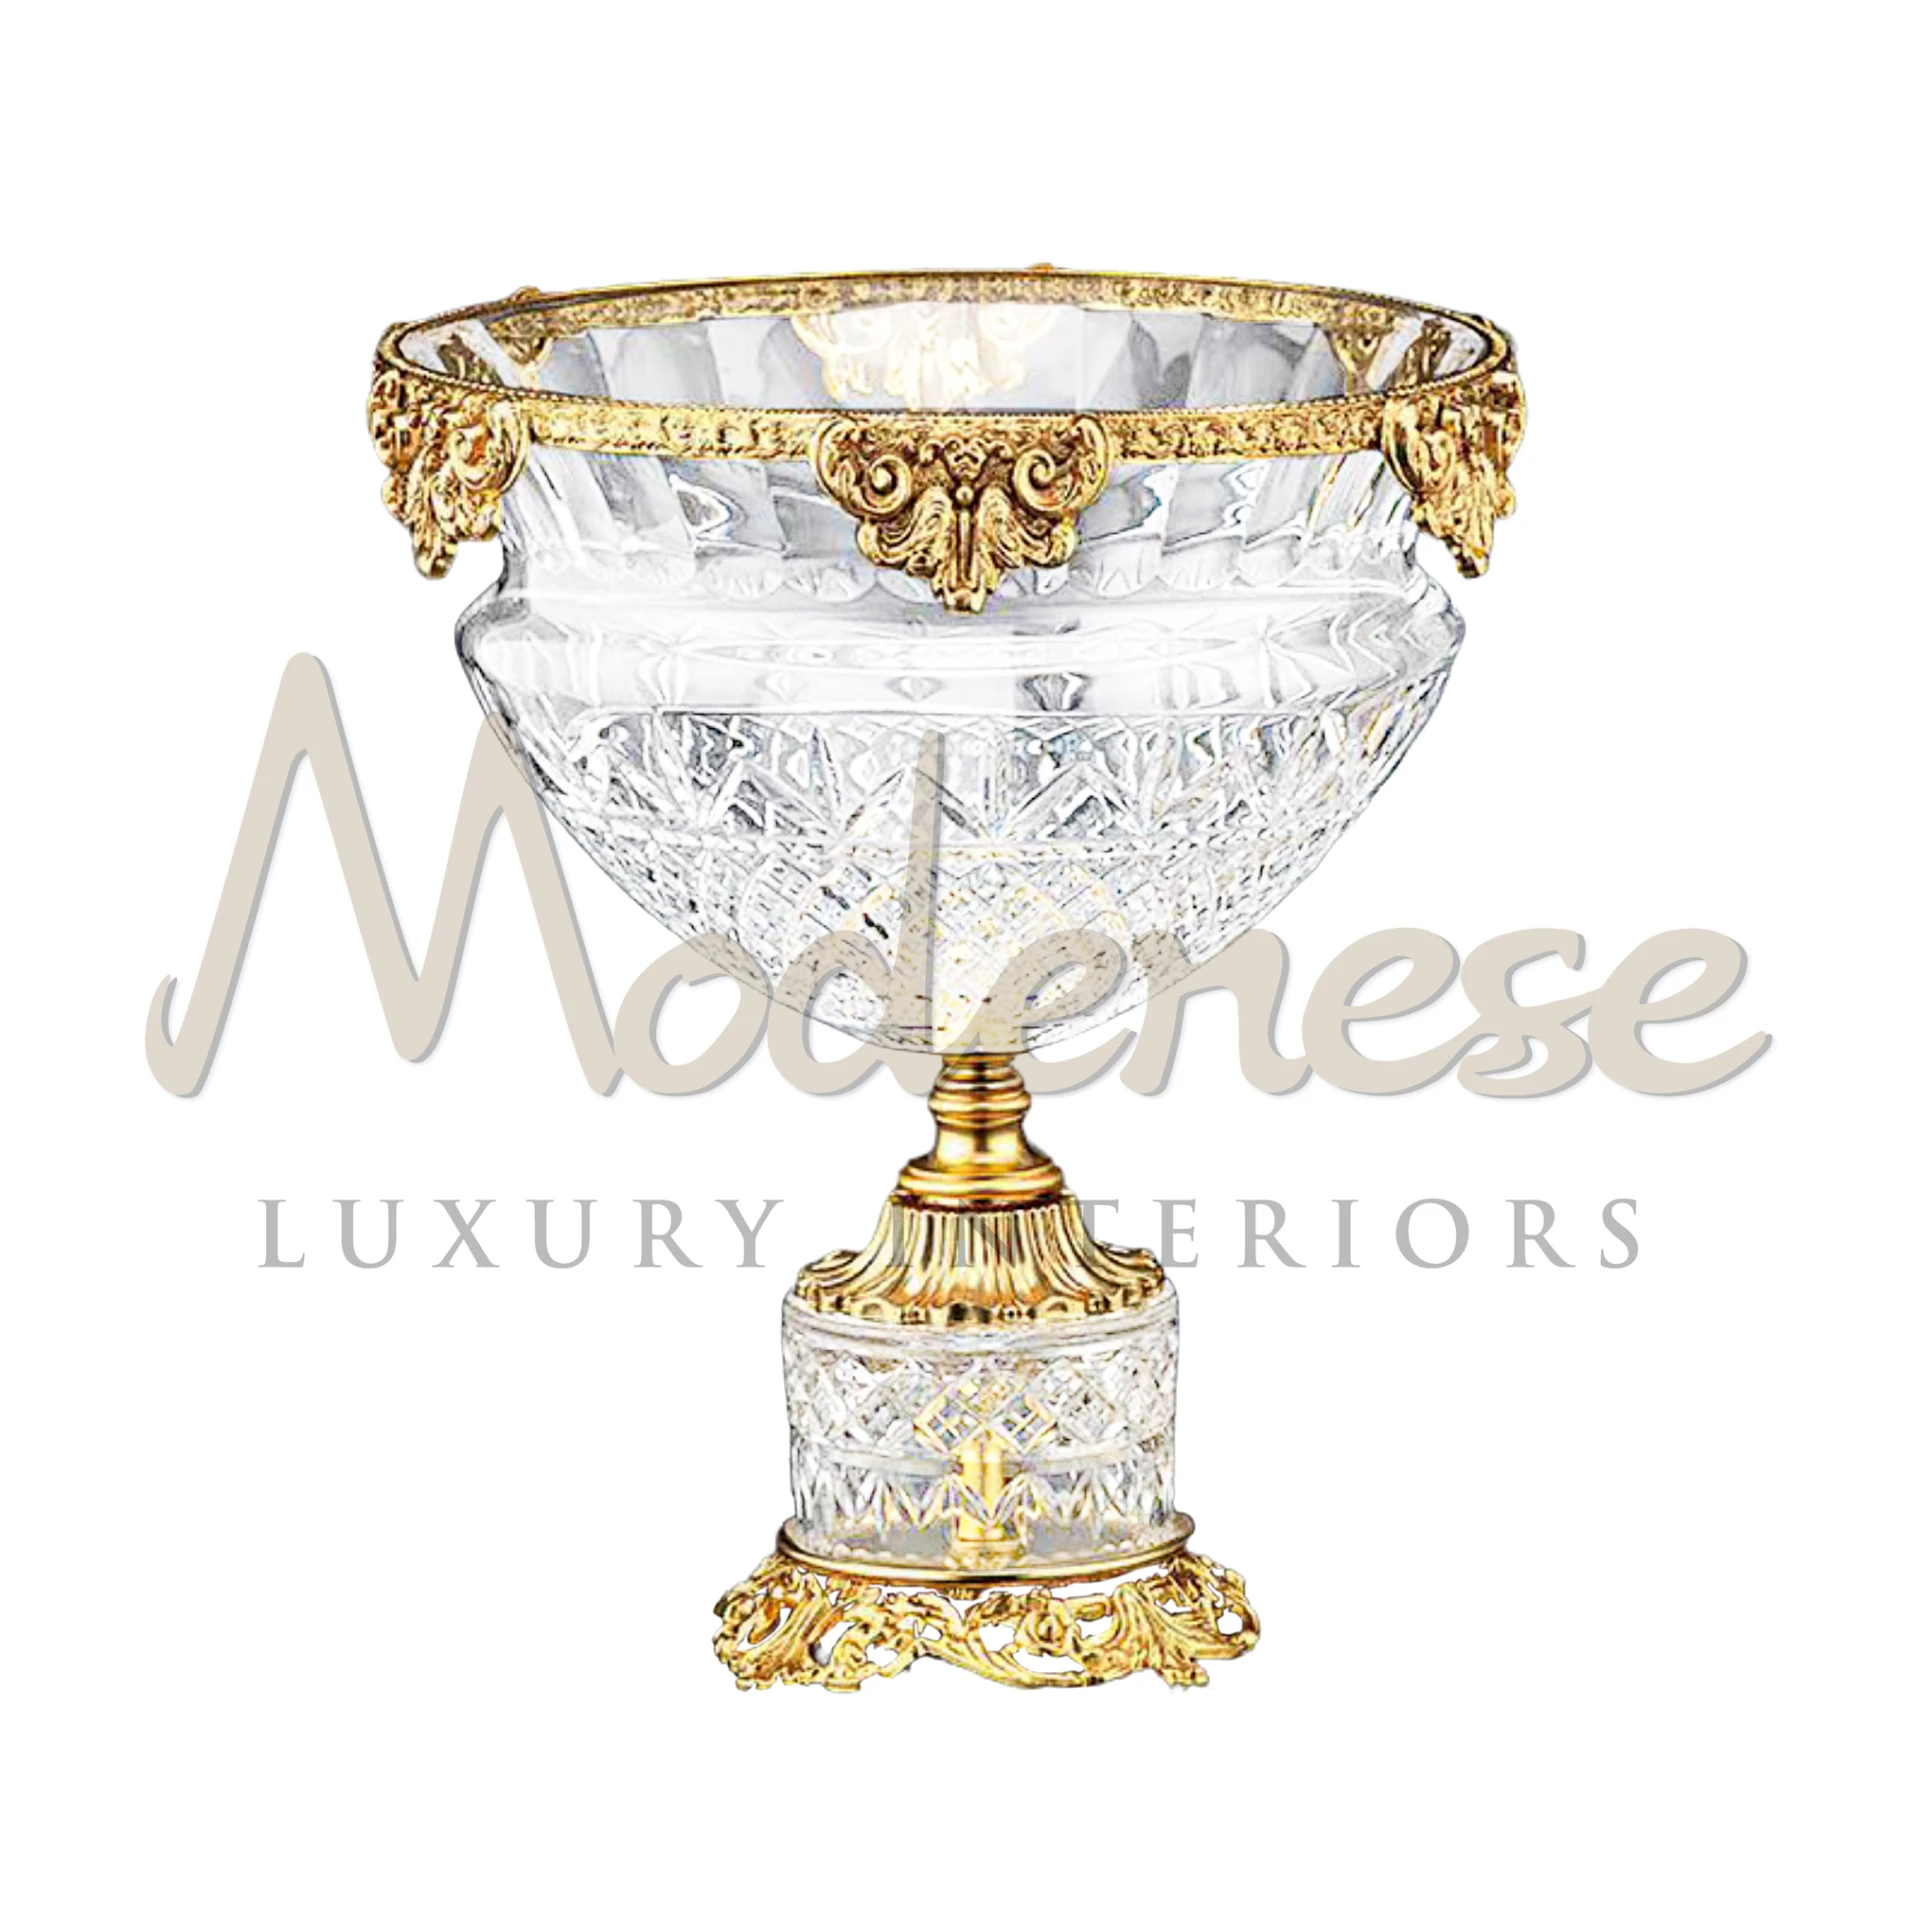 Imperial Glass Gold Ornamented Vase, a Modenese Furniture masterpiece, ideal for adding sophisticated elegance to luxury interiors with its classic design.